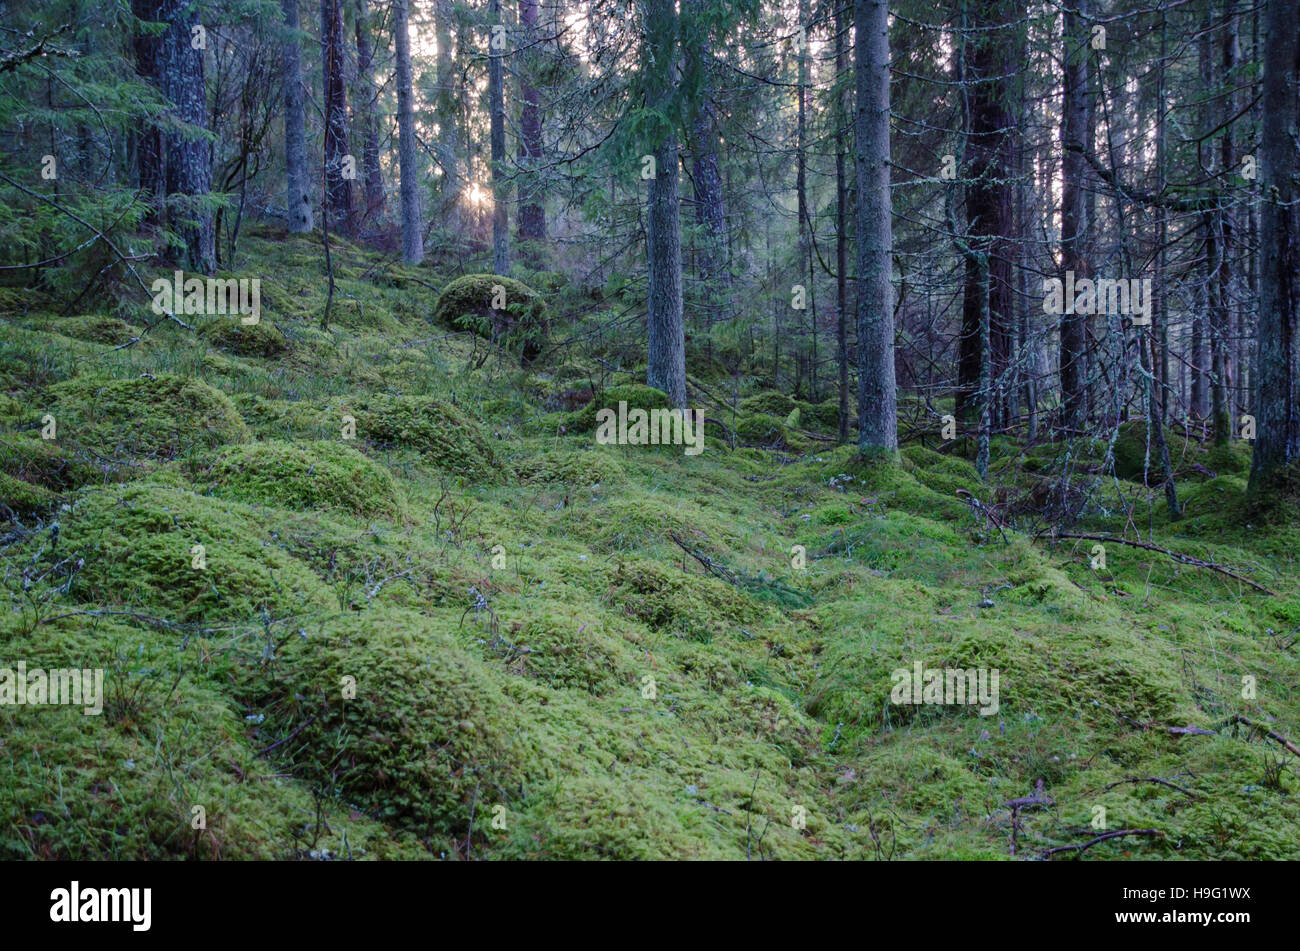 Old untouched coniferous forest with green mossy ground Stock Photo